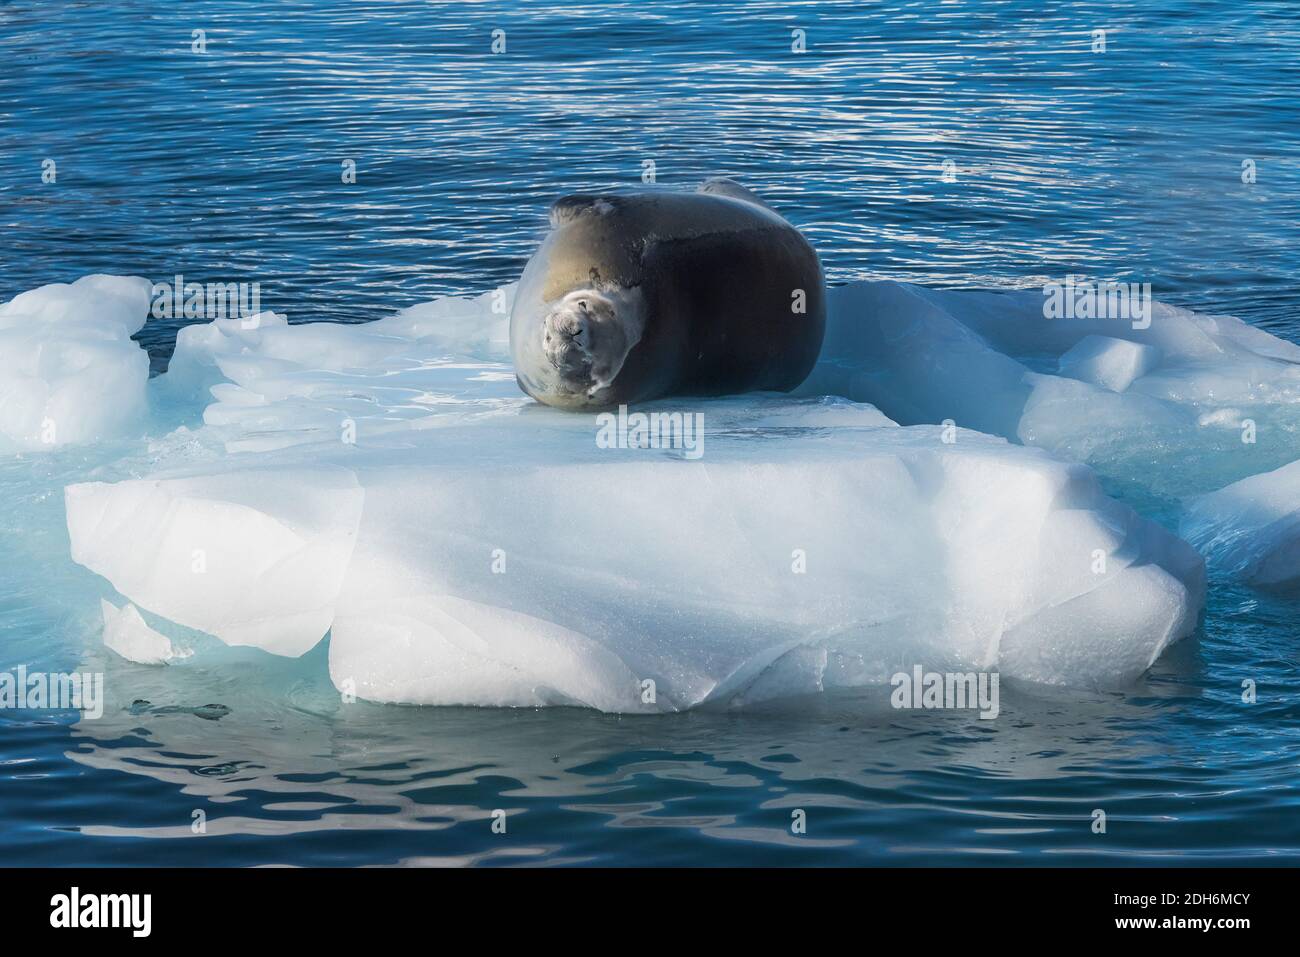 Crabeater seal (Lobodon carcinophaga), also known as the krill-eater seal, on floating ice in South Atlantic Ocean, Paradise Bay, Antarctica Stock Photo